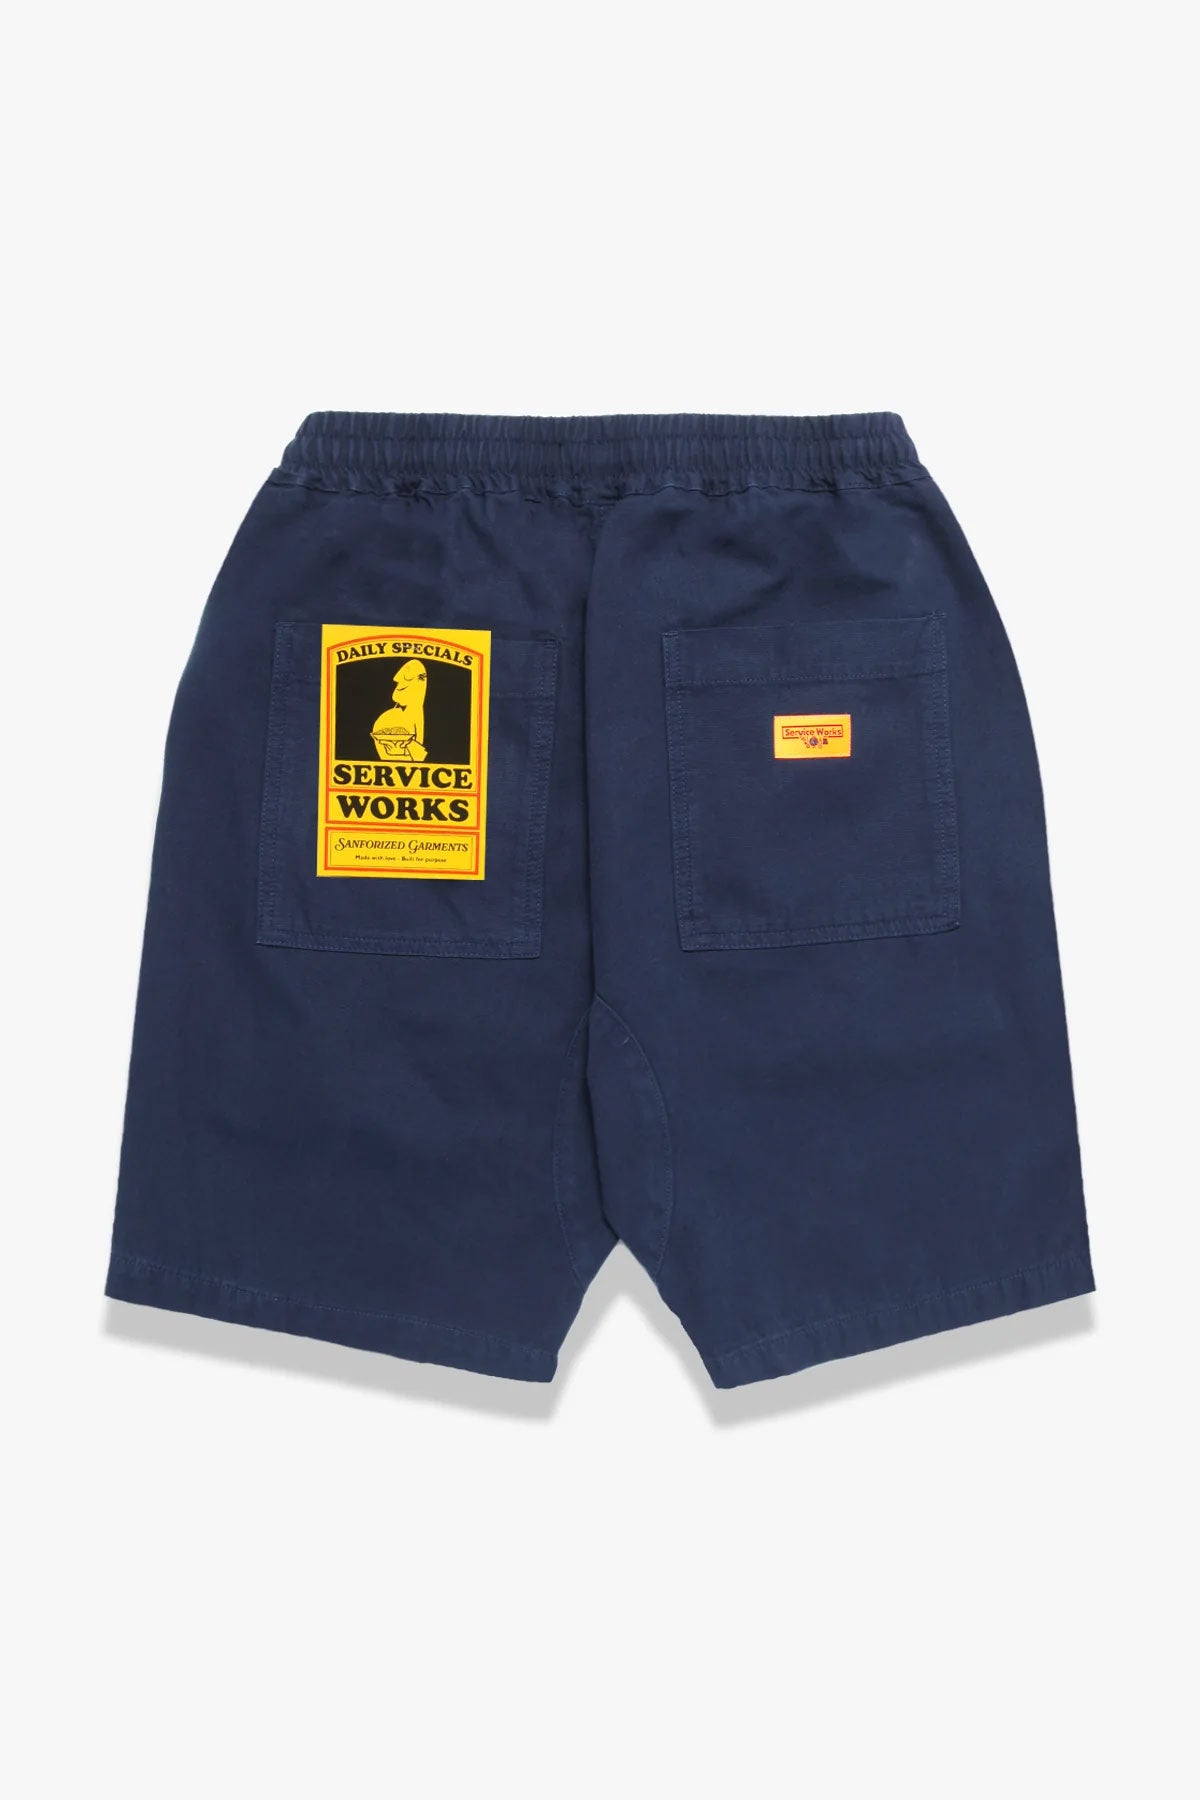 Service Works - Classic Canvas Chef Shorts in Navy